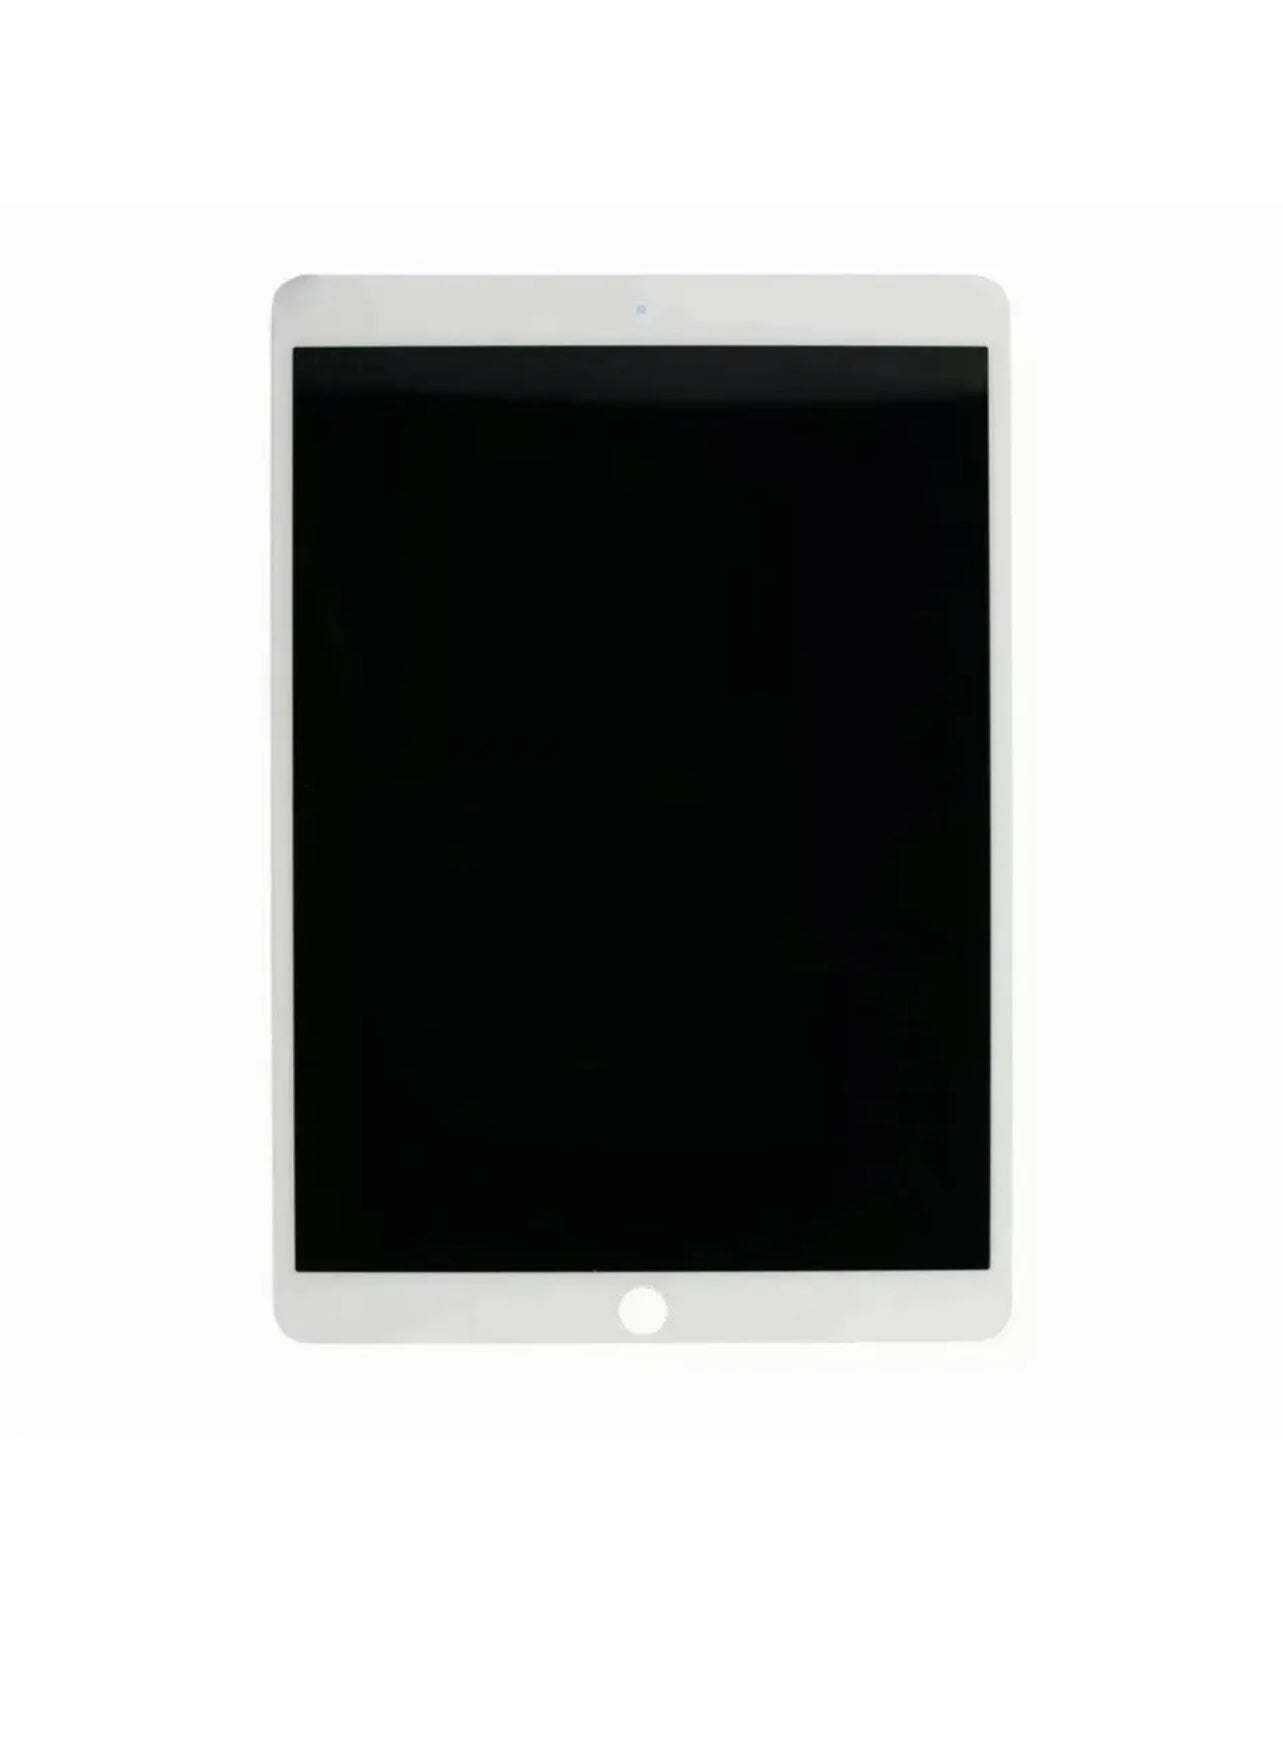 iPad Mini 5 Mini (2019) Lcd Screen Display  Touch  High Quality Replacement A2126 A2124 A2133  A2125